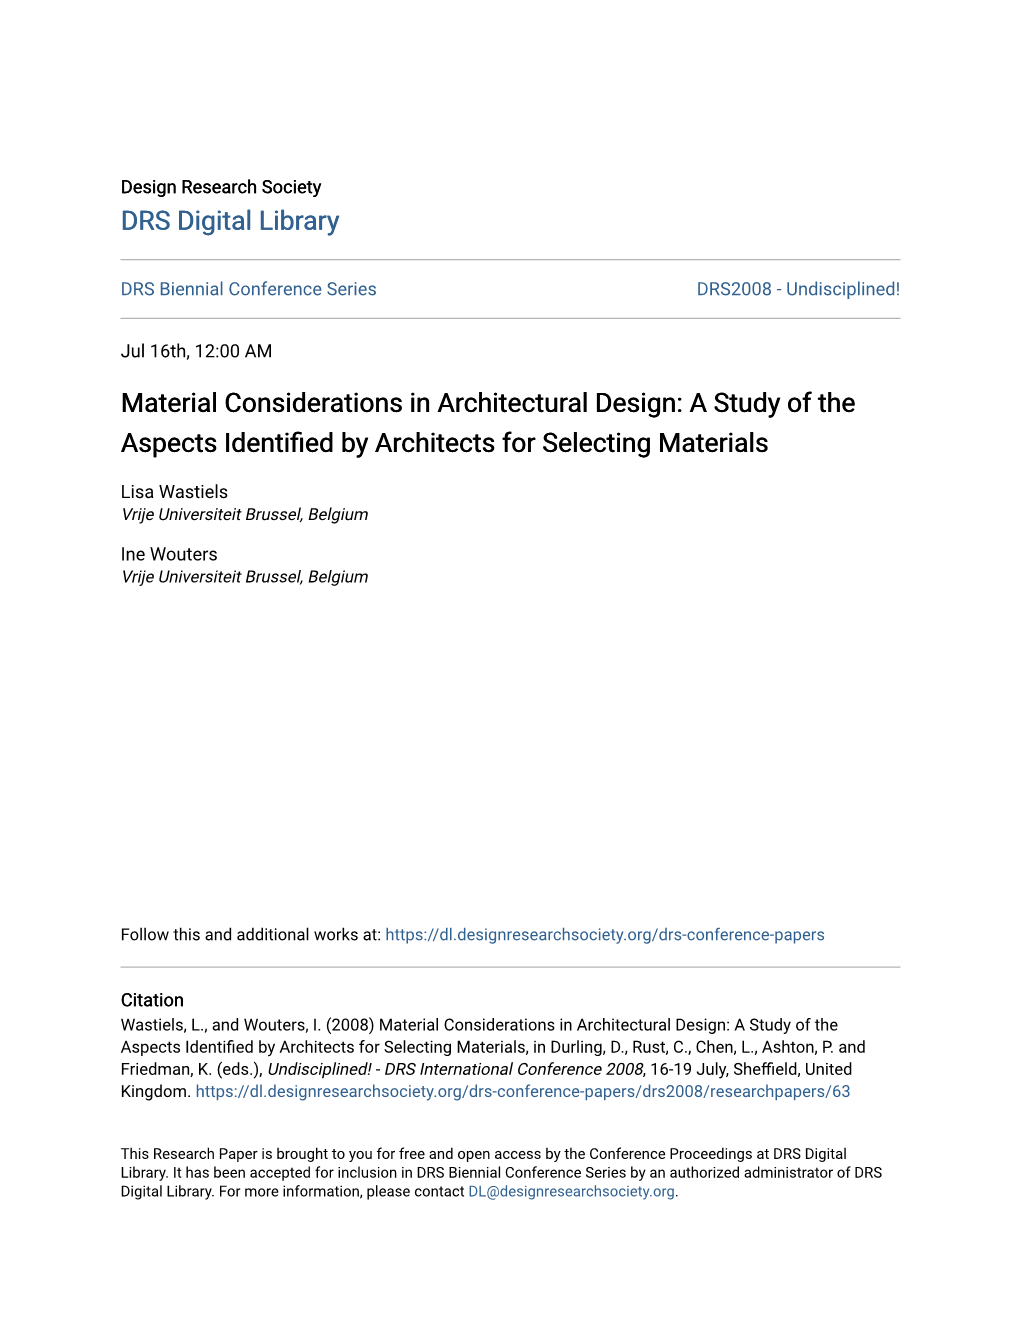 Material Considerations in Architectural Design: a Study of the Aspects Identified Yb Architects for Selecting Materials